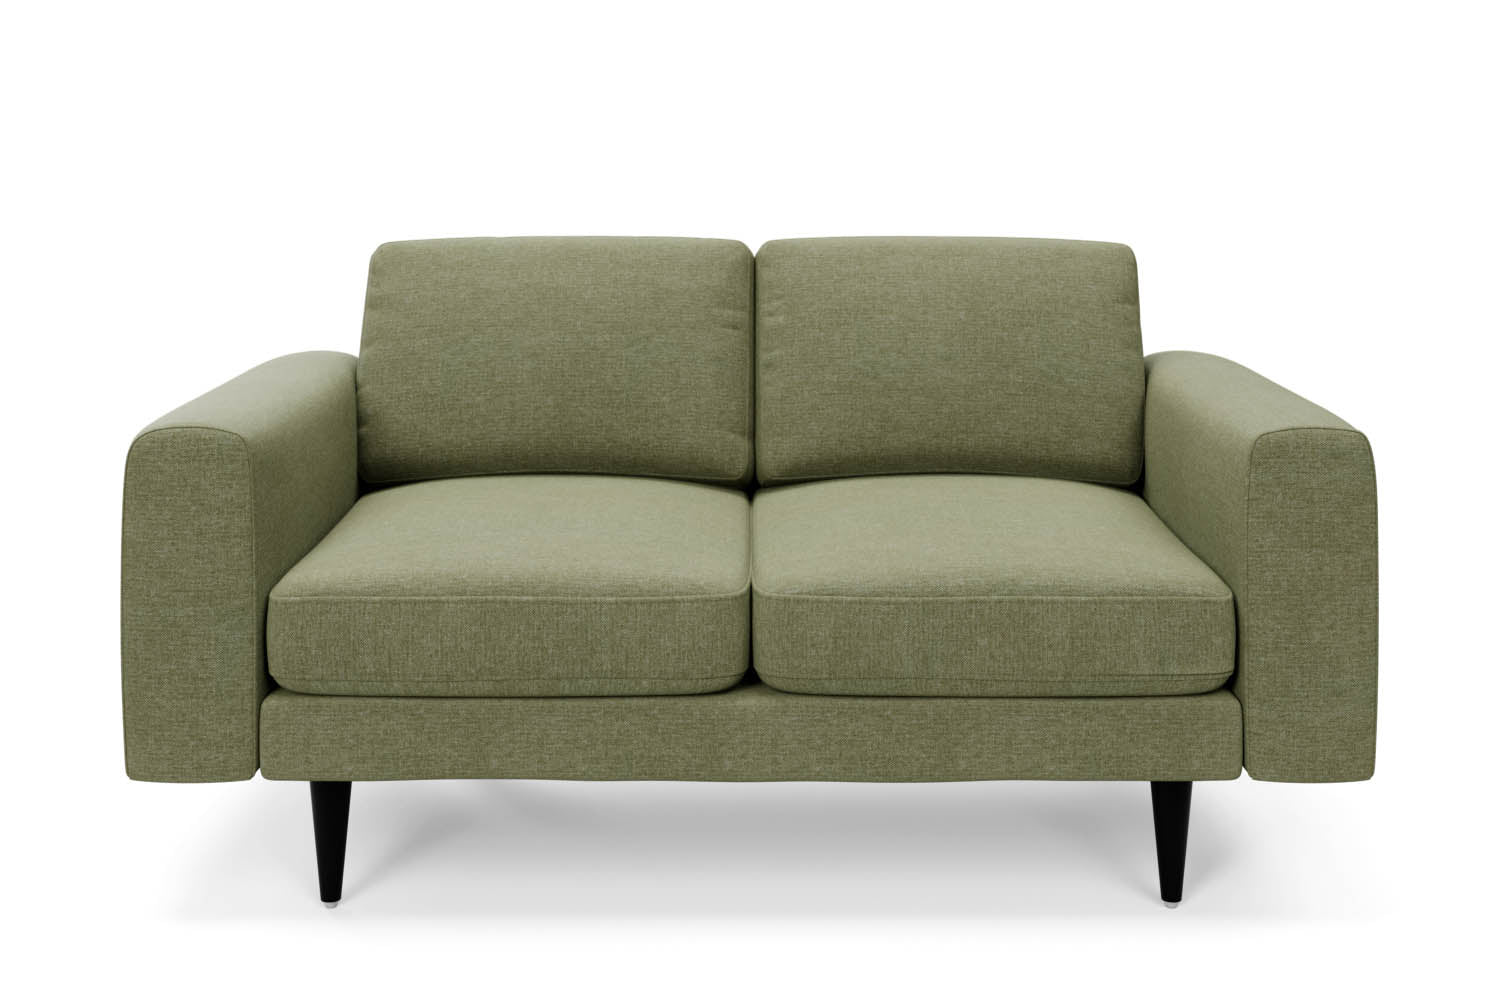 The Big Chill 2 Seater Sofa in Sage Chenille with black legs front variant_40886317580336